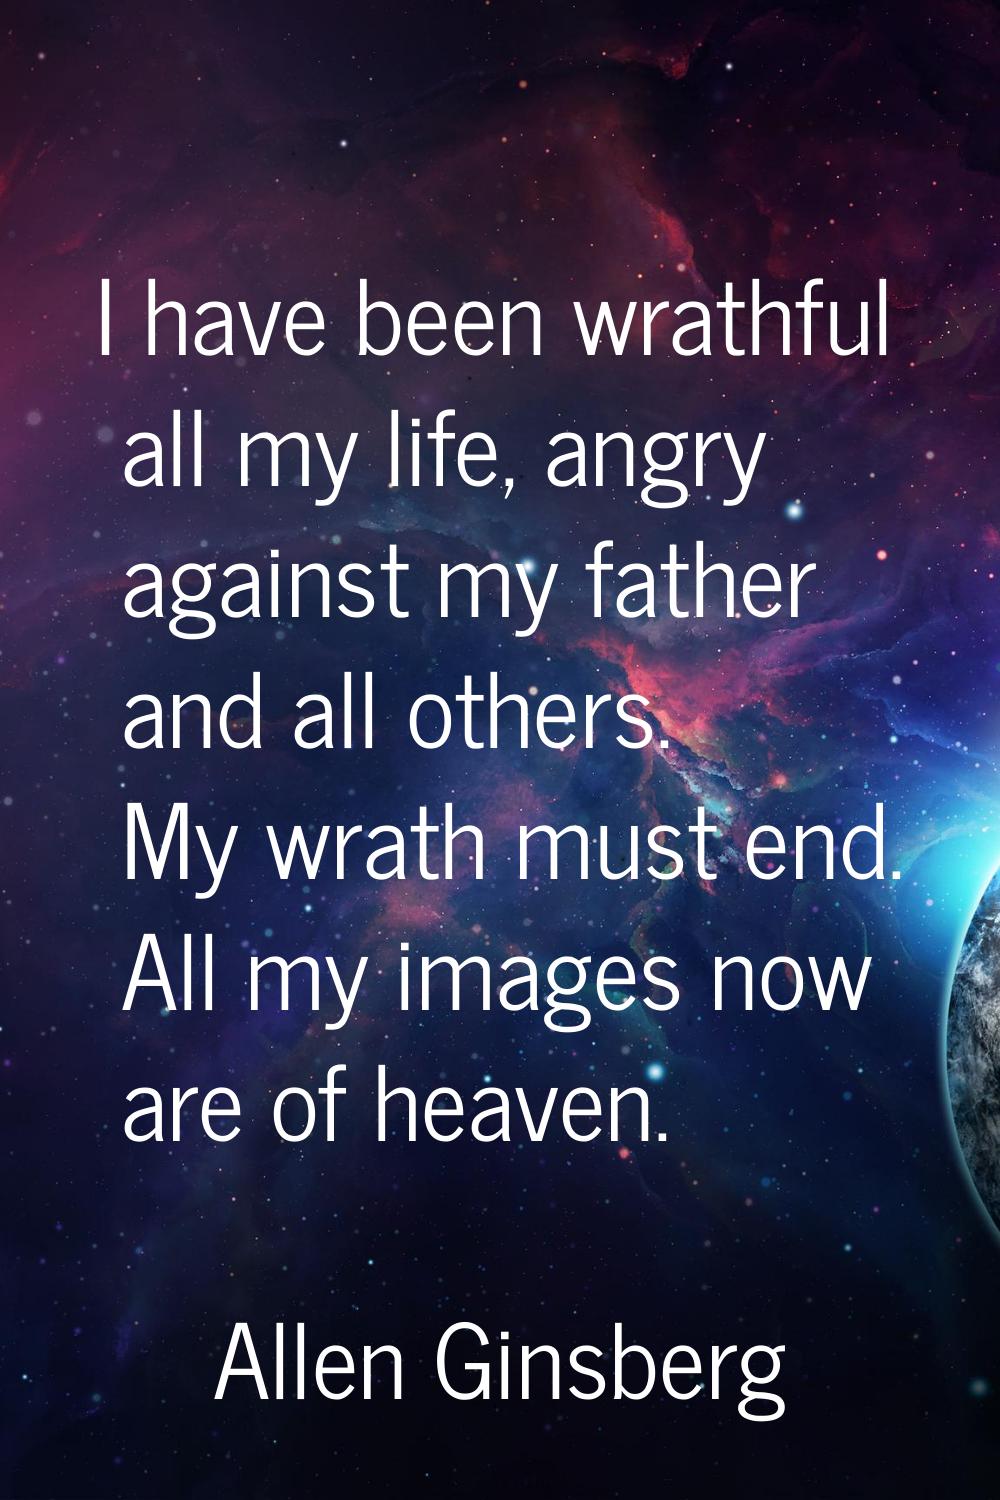 I have been wrathful all my life, angry against my father and all others. My wrath must end. All my